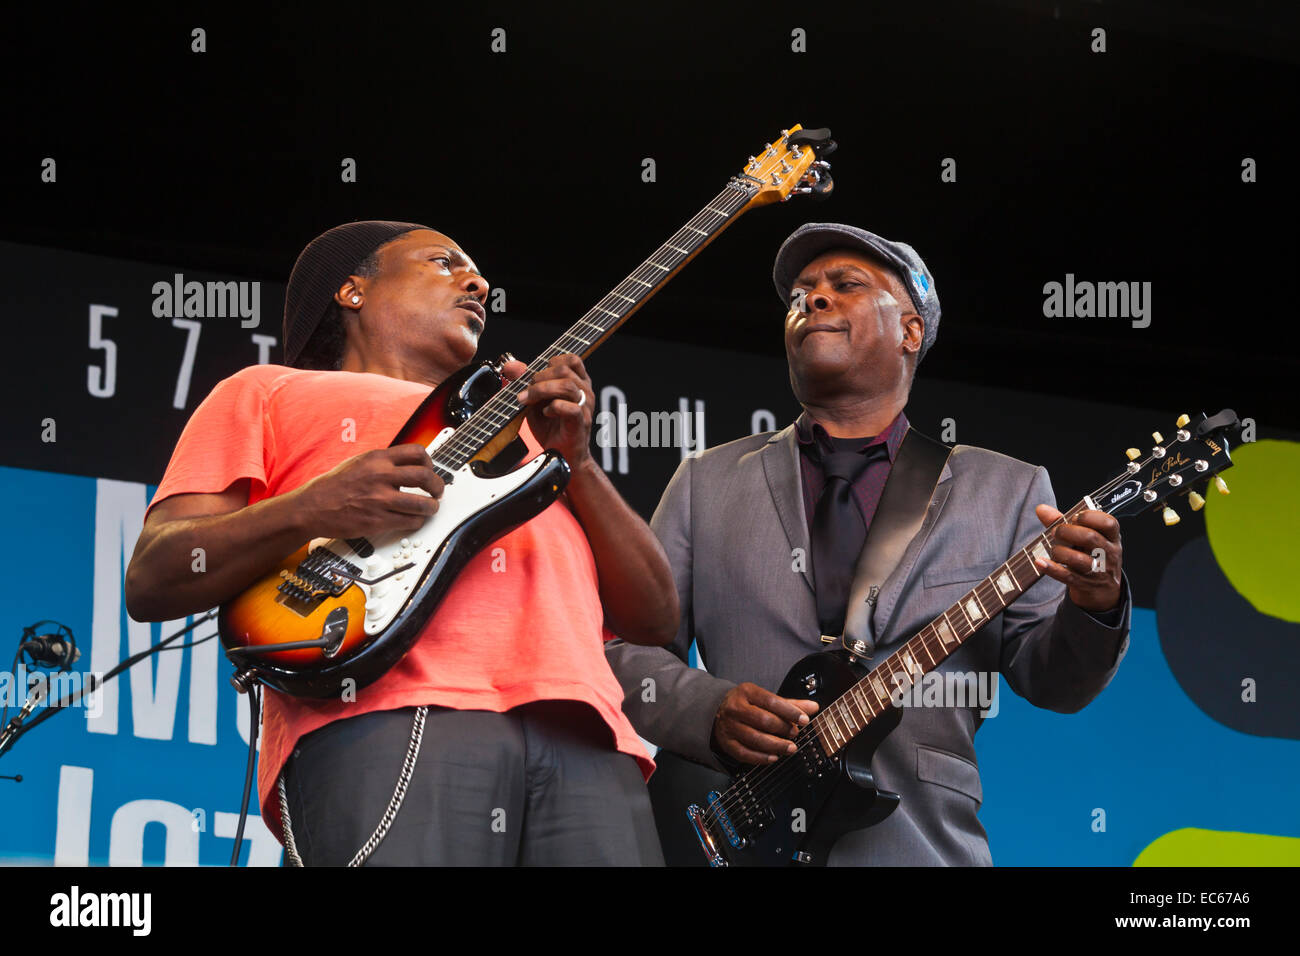 BOOKER T JONES and VERNON BLACK preform on the main stage at the MONTEREY JAZZ FESTIVAL Stock Photo